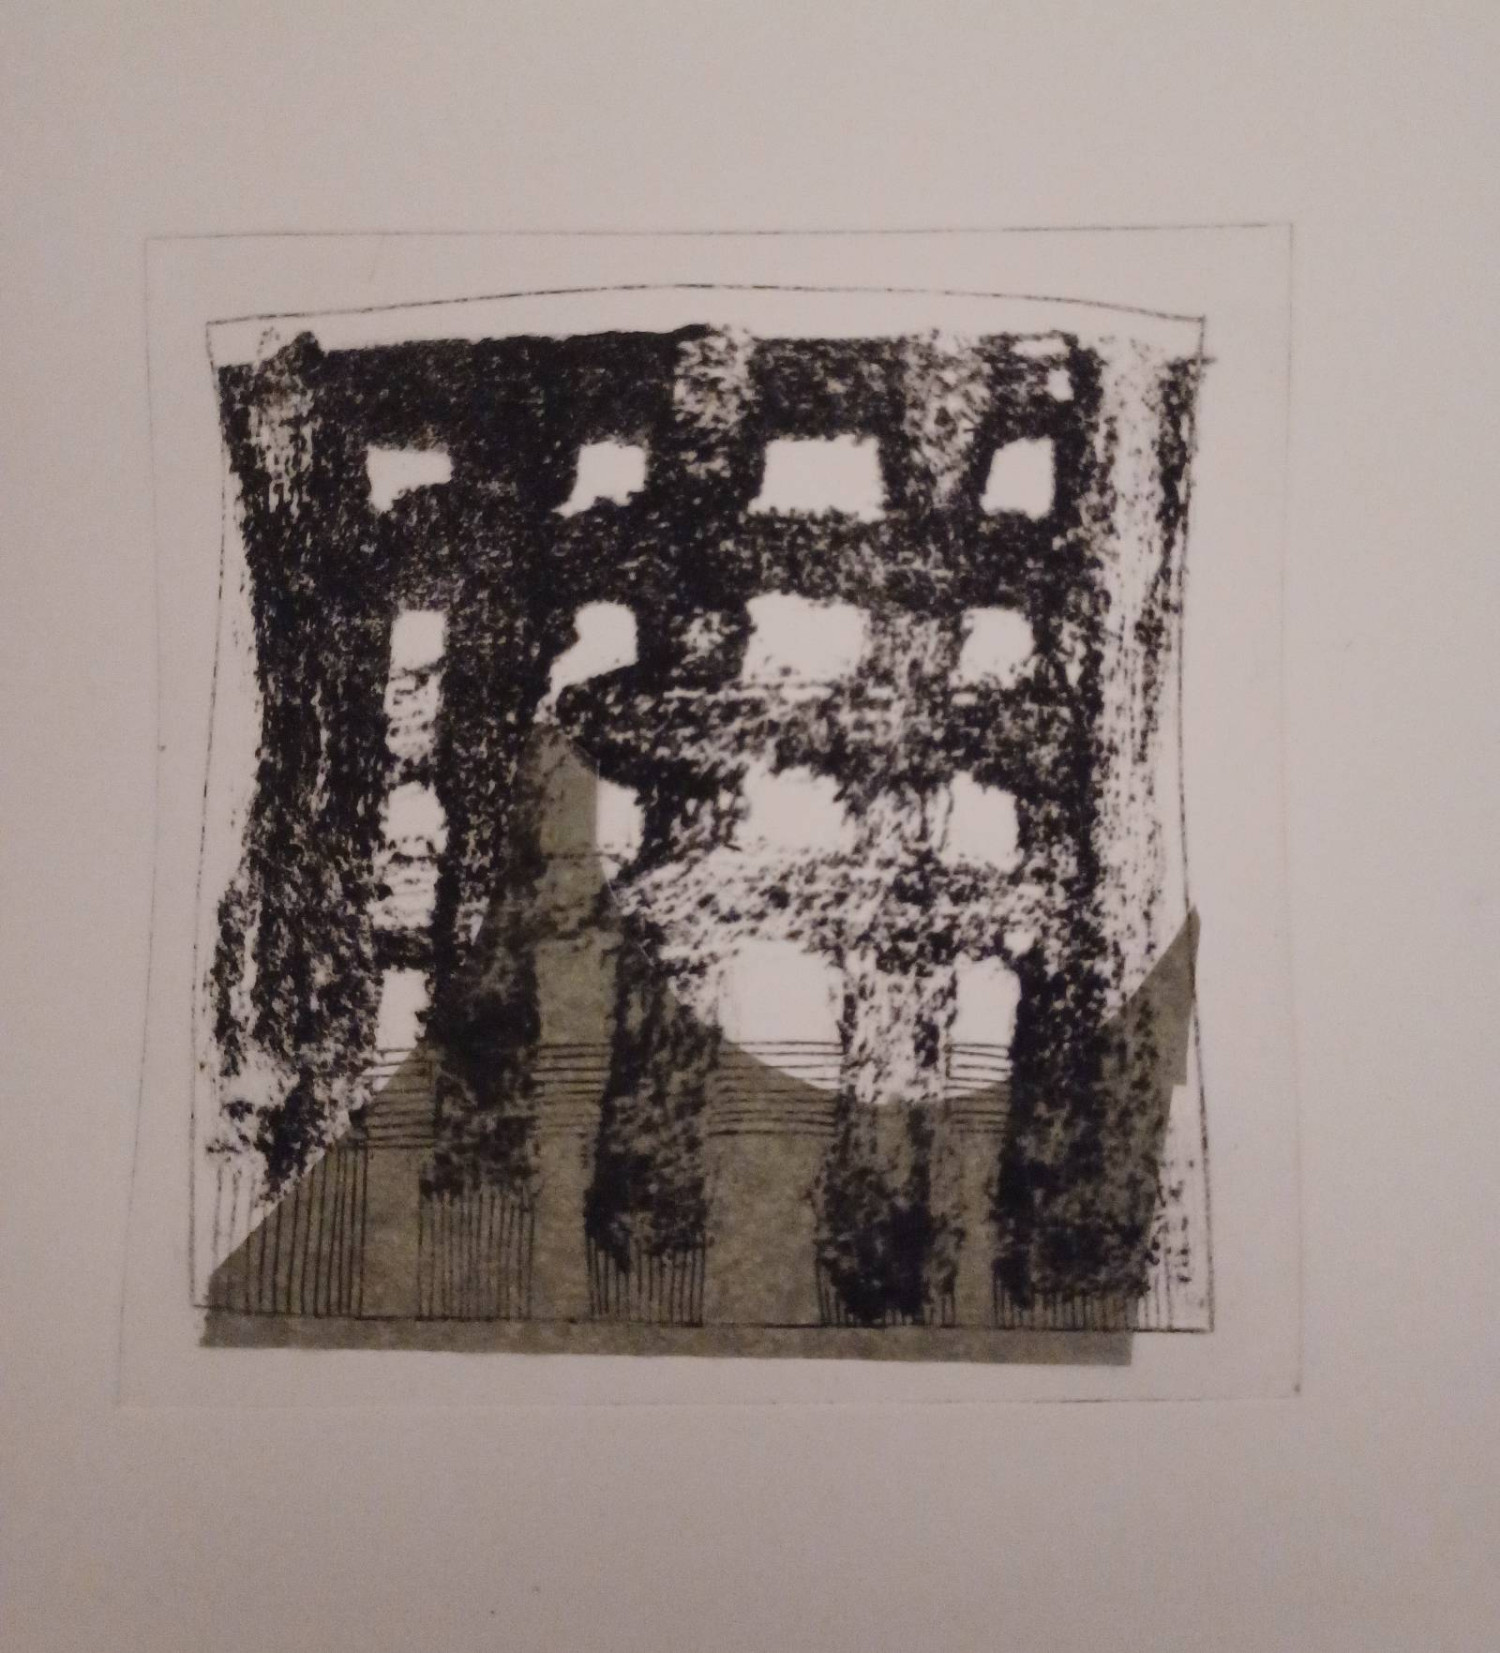 *Bring Together*, dry point and embossing, 14 x 14cm